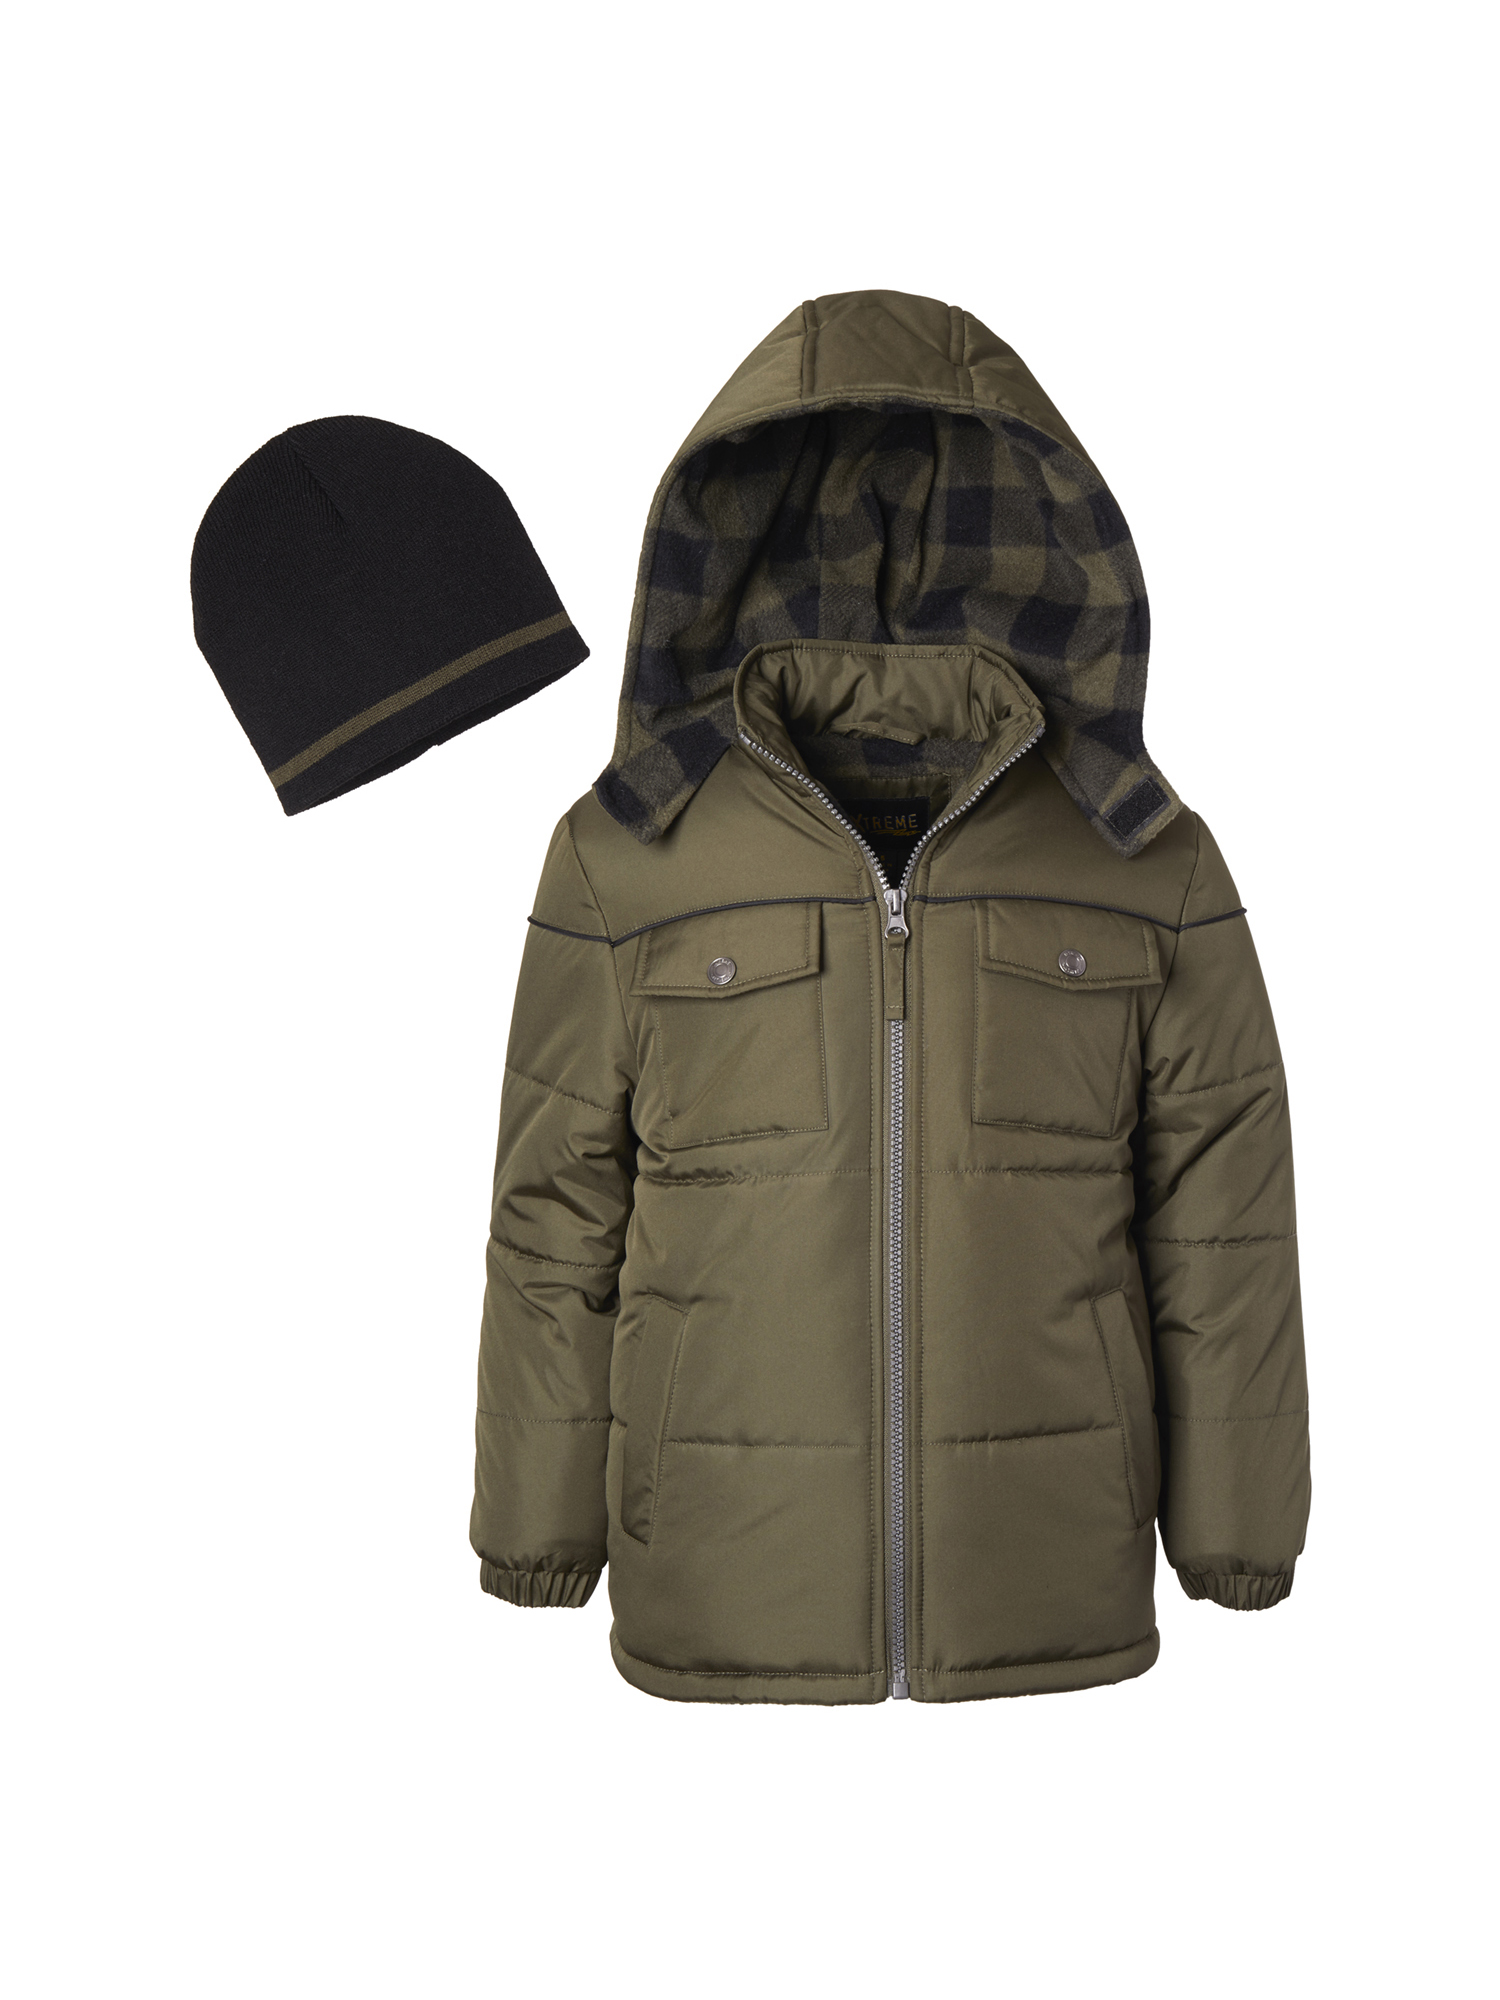 Puffer Jacket with Buffalo Check Hood - Free Gift with Purchase (Little Boys & Big Boys) - image 1 of 2